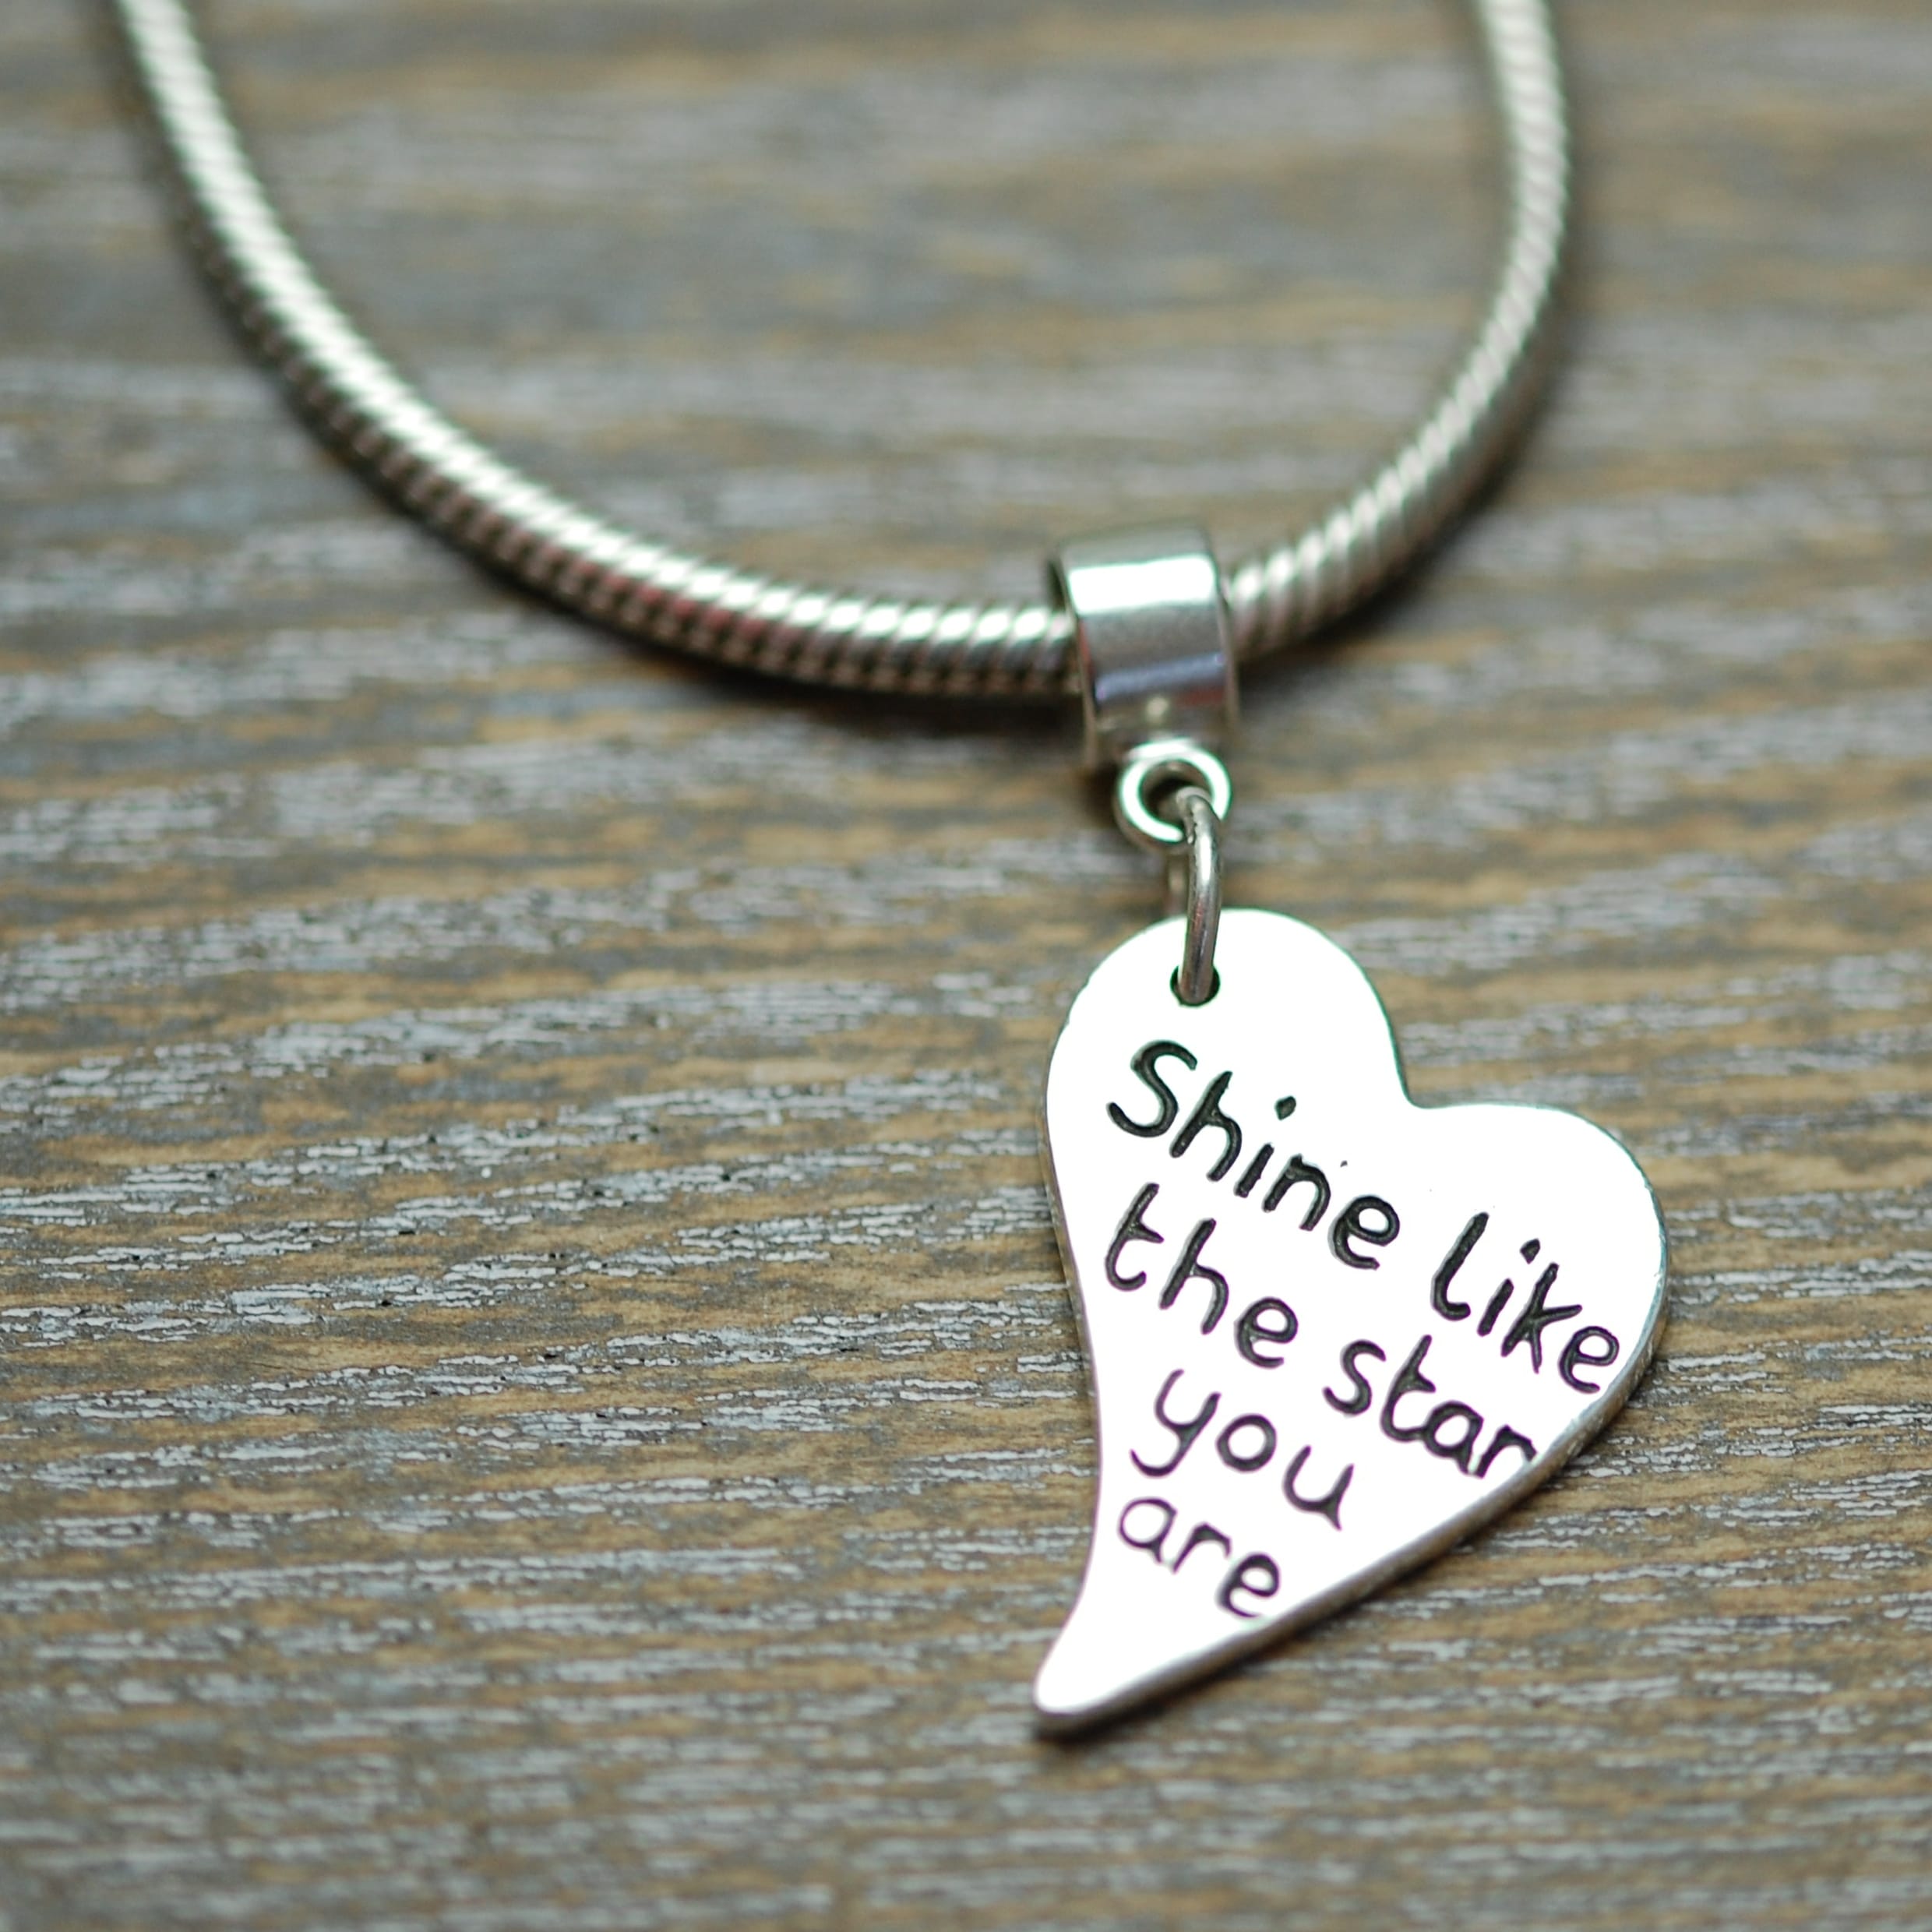 Regular silver message charm with "Pandora style" charm carrier